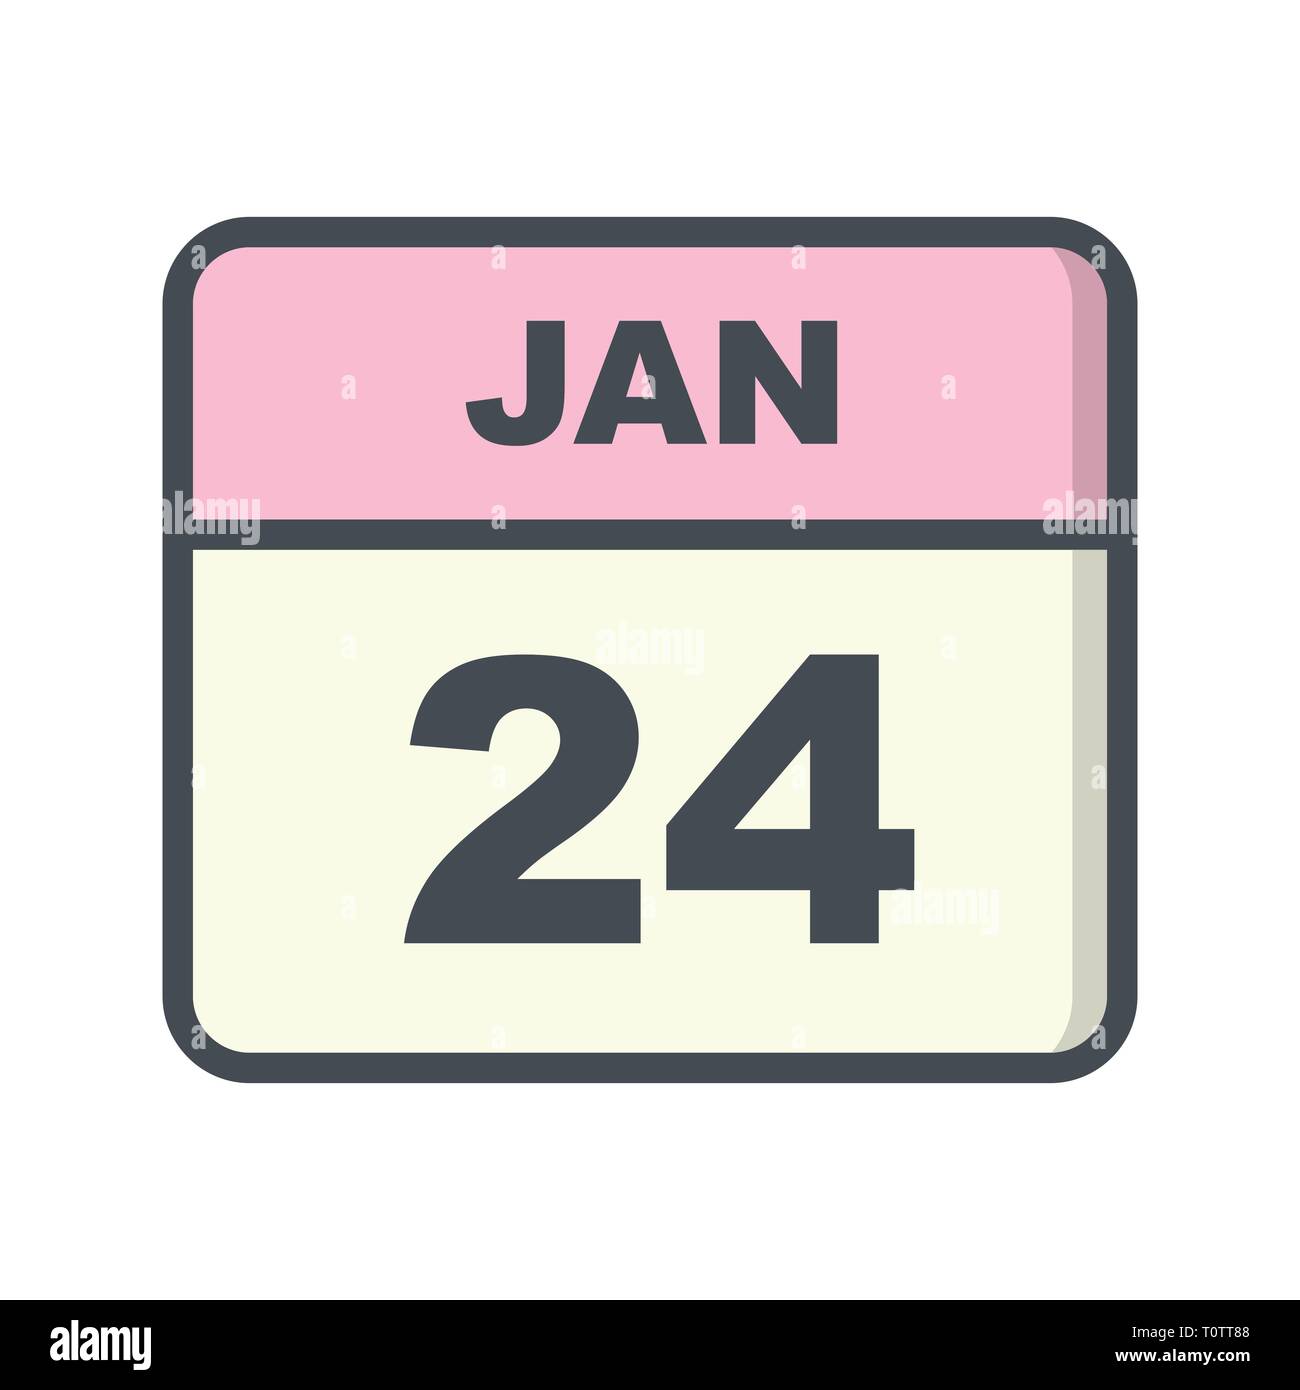 January 24th Date on a Single Day Calendar Stock Photo